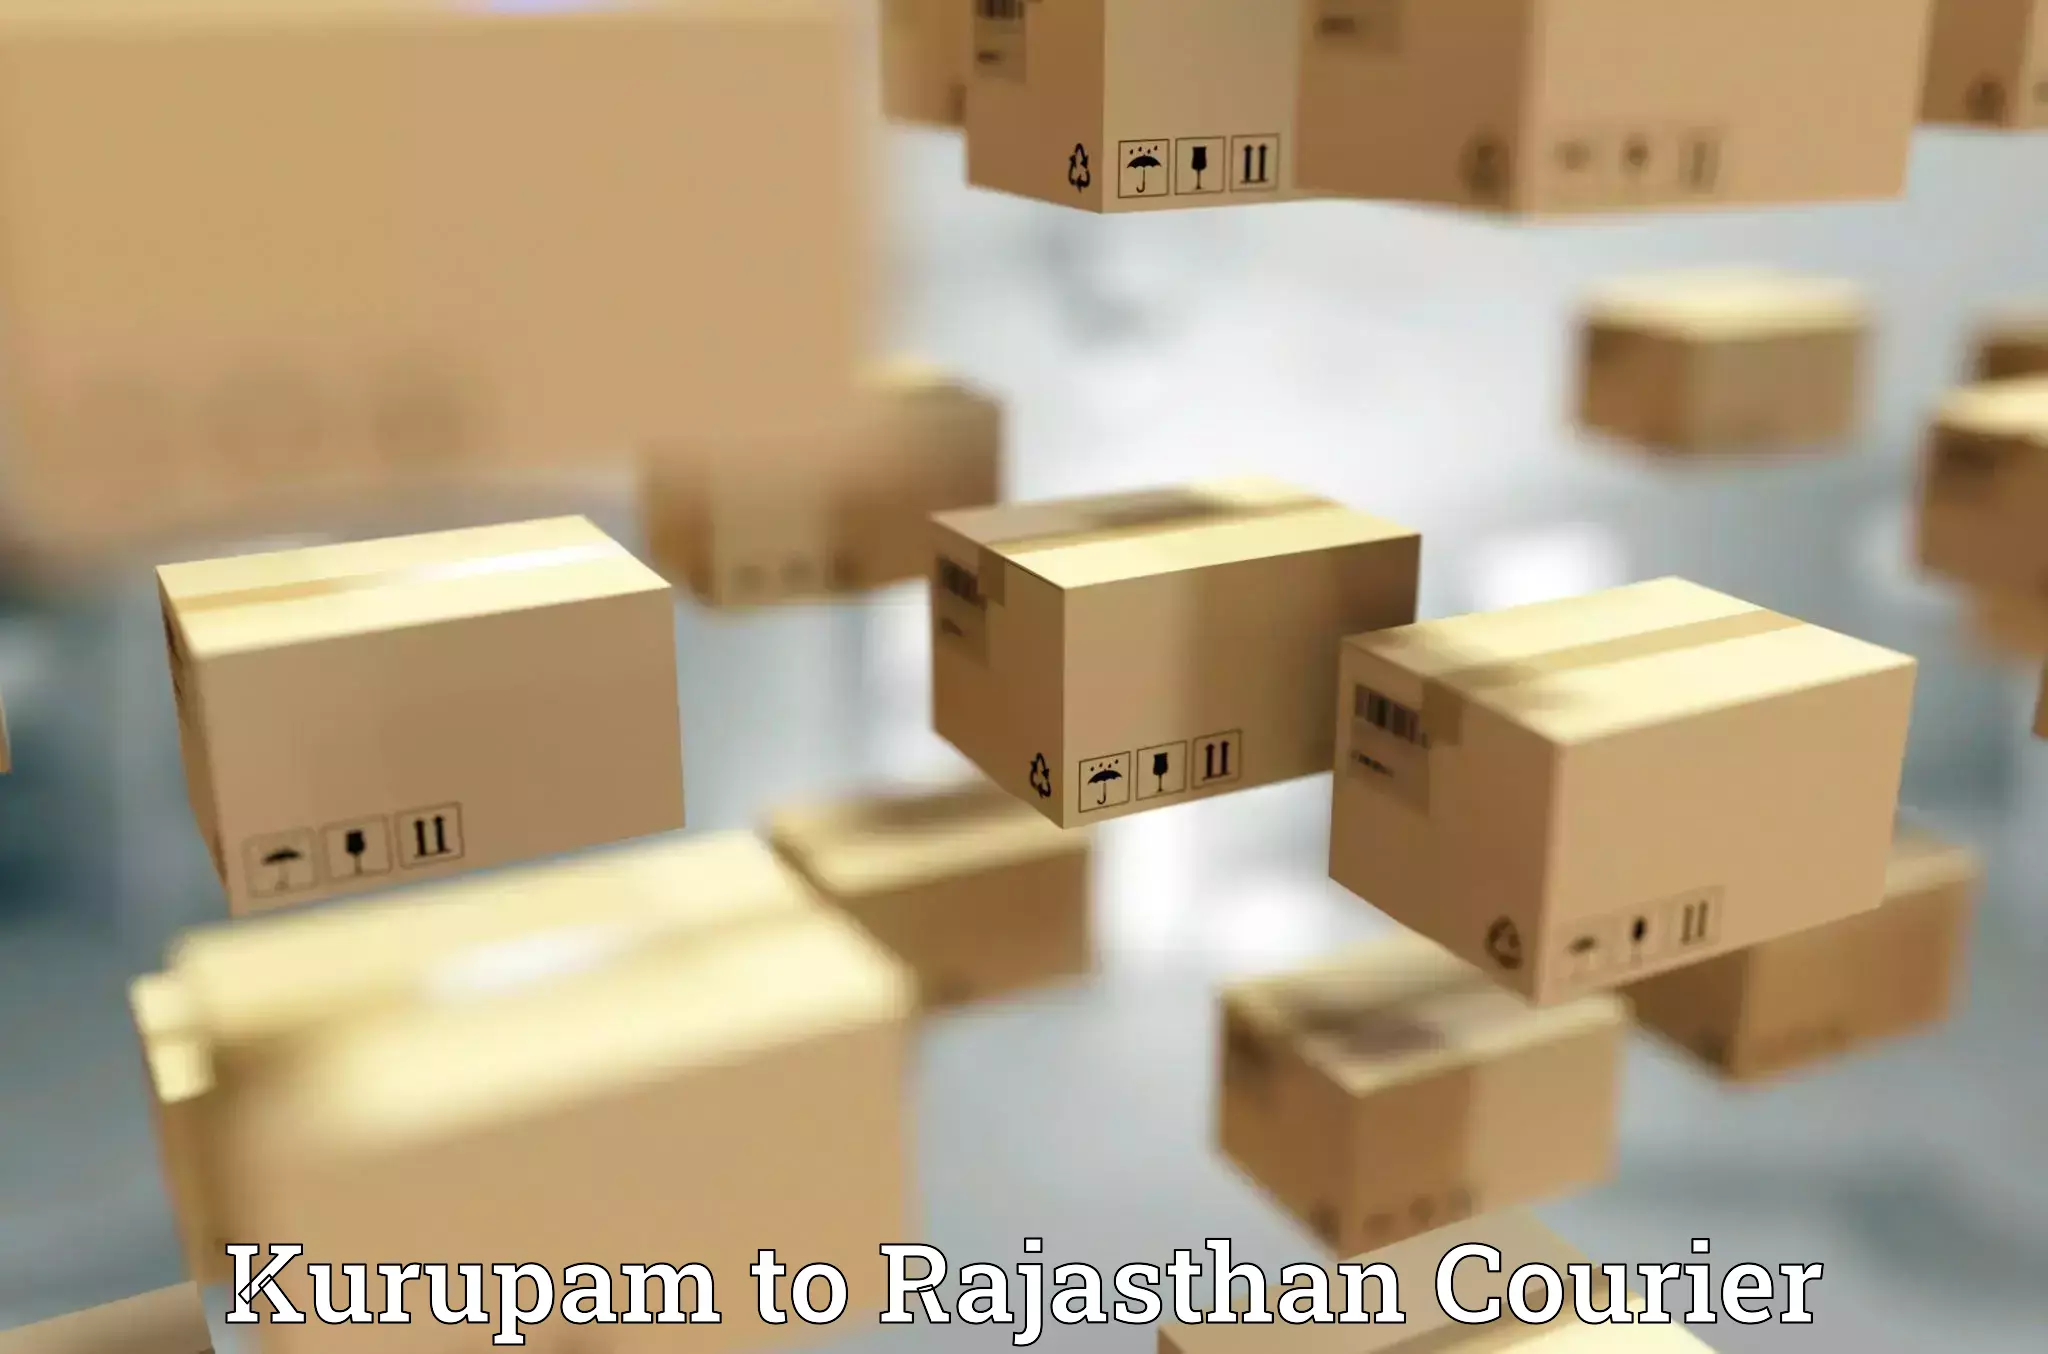 Global courier networks Kurupam to Yeswanthapur